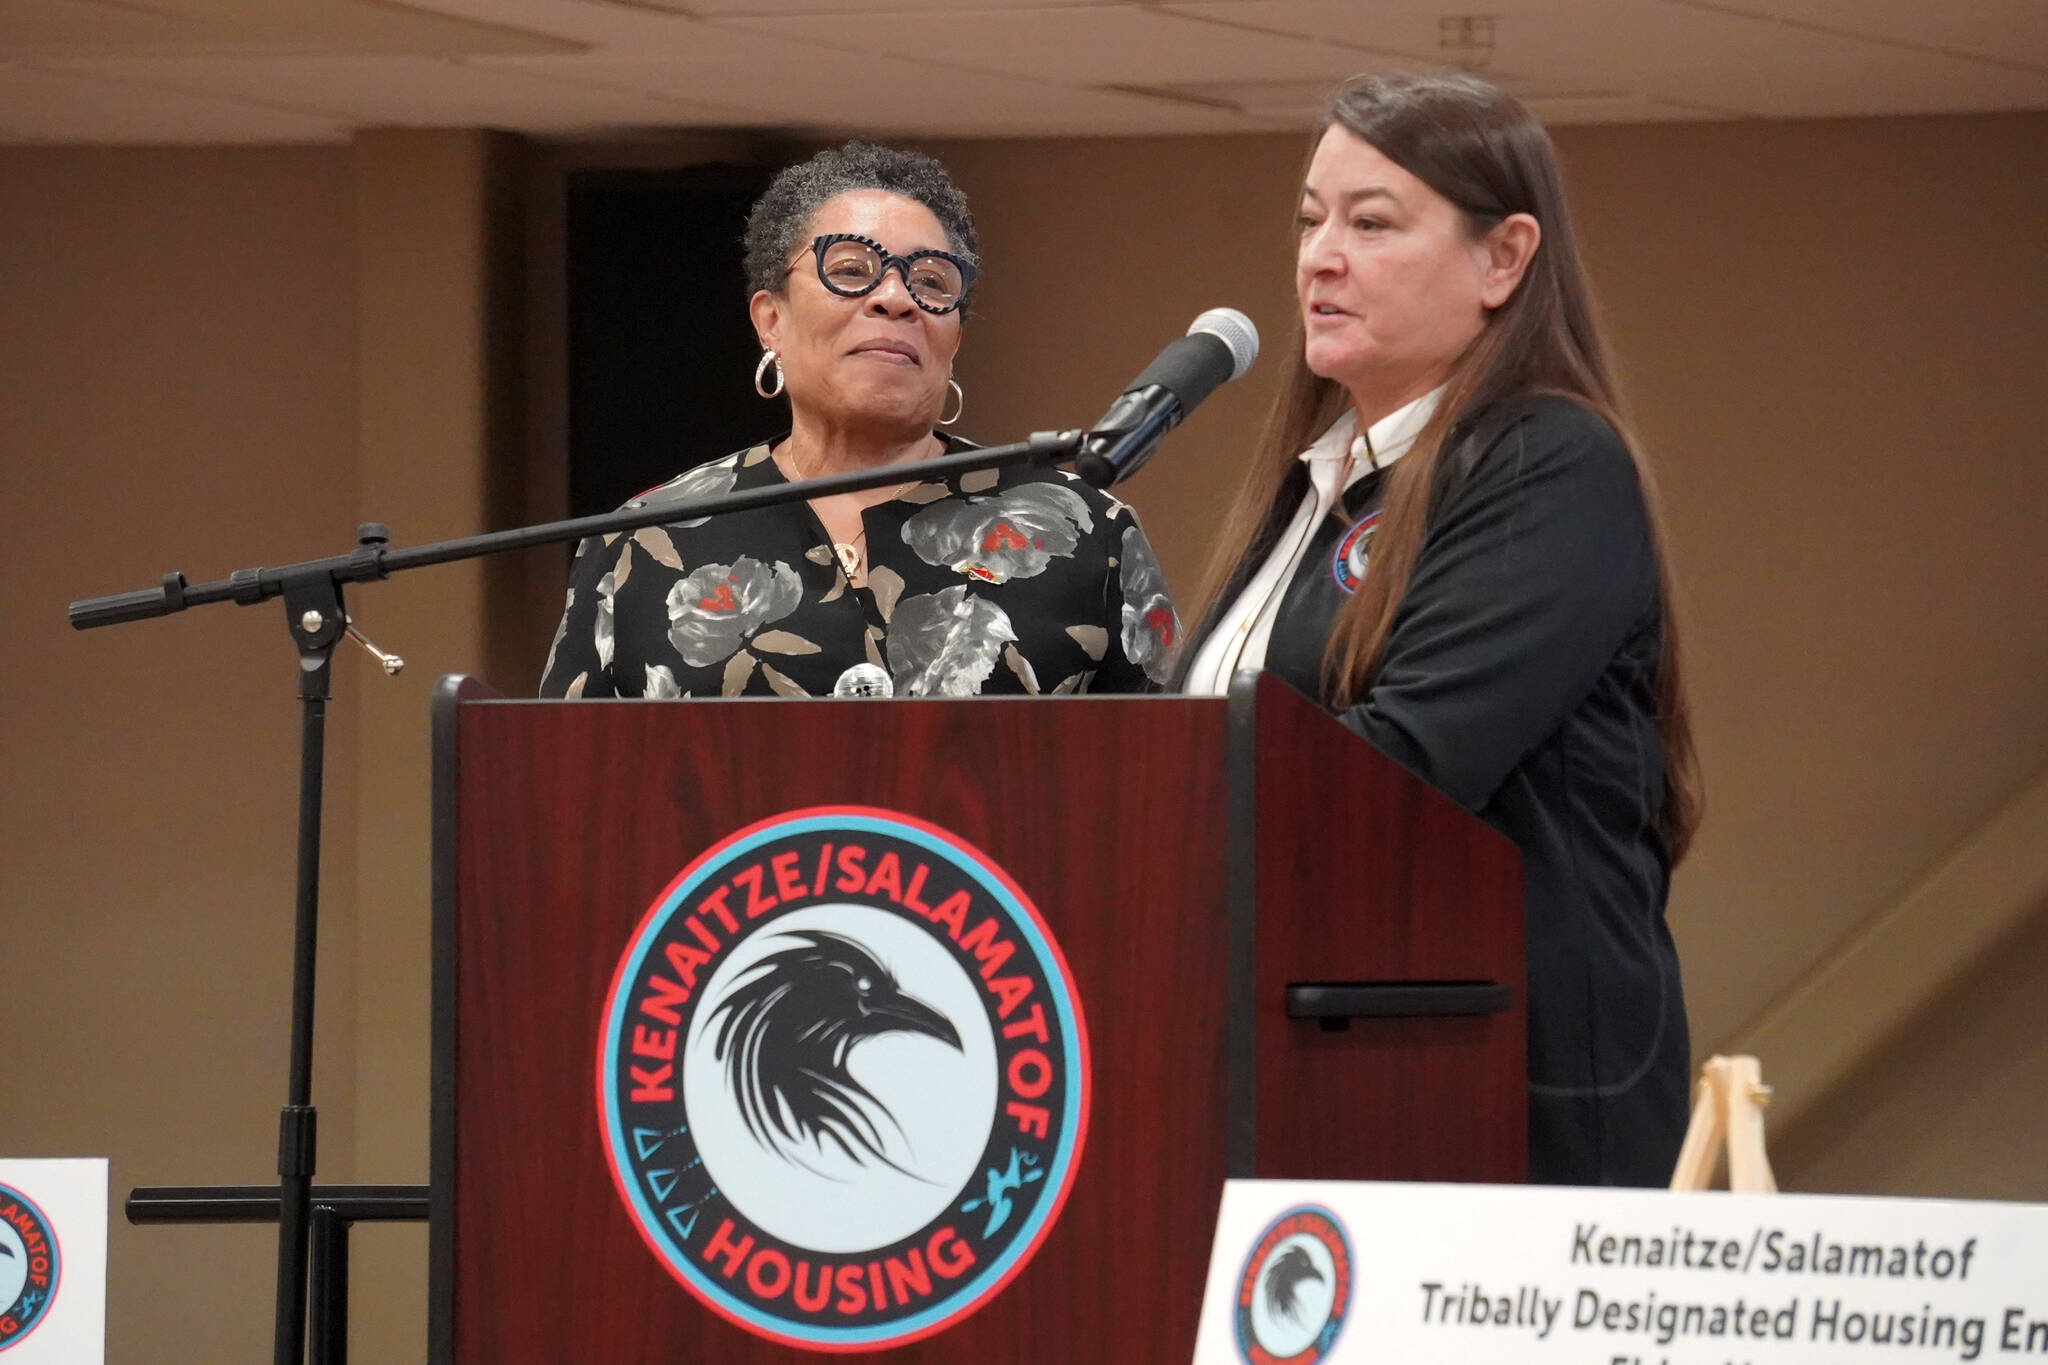 U.S. Department of Housing and Urban Development Secretary Marcia L. Fudge and Kenaitze Indian Tribe Tribal Council Chair Ronette Stanton participate in a press conference announcing $7.5 million in federal funding designated for the Kenaitze/Salamatof Tribally Designated Housing Entity at the Kahtnuht’ana Duhdeldiht Campus in Kenai, Alaska, on Wednesday, Aug. 30, 2023. (Jake Dye/Peninsula Clarion)